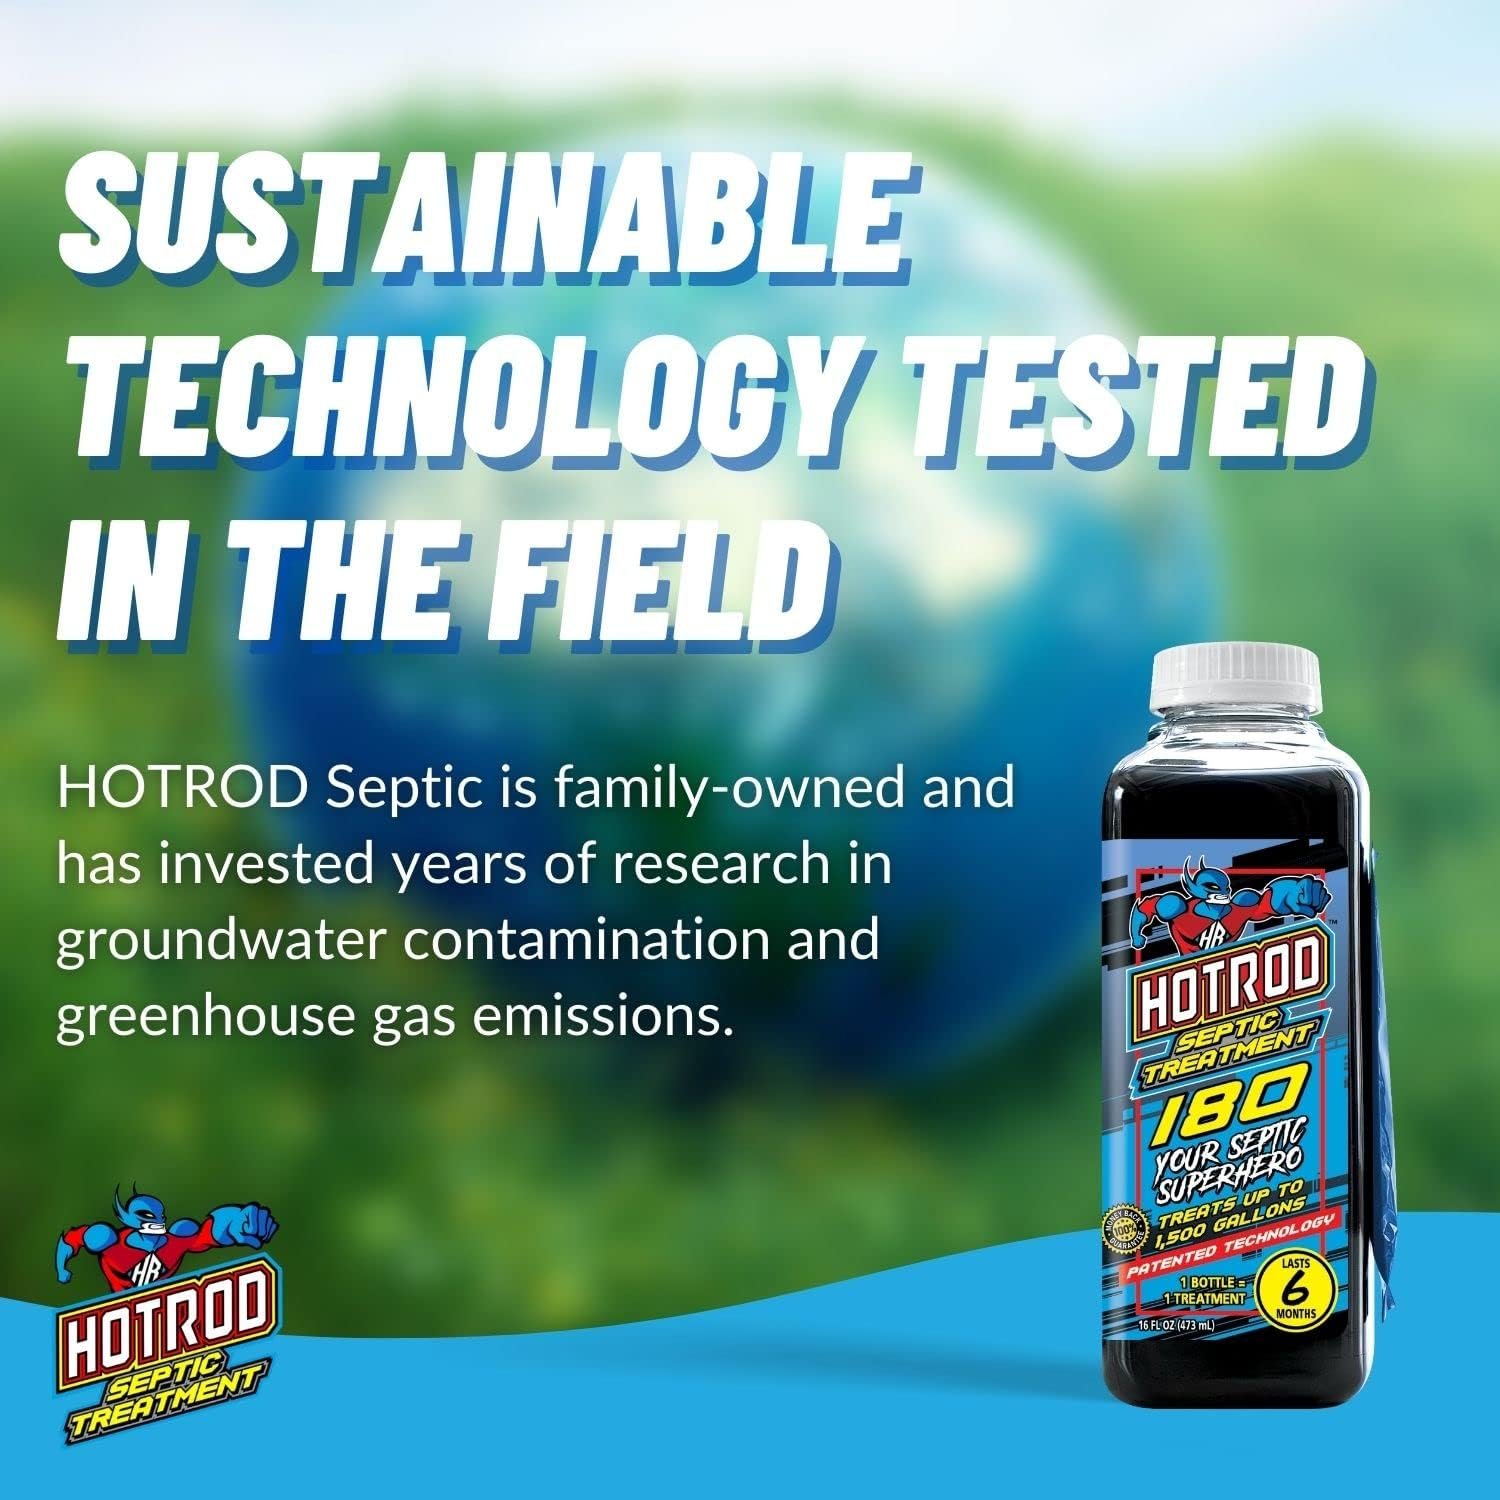 HOTROD Septic Tank Treatment - #1 RATED 6 Month Supply Extends Septic System Life and Prevents Costly Repairs - Industrial Grade - Easy to Use - Safe on Piping and Plumbing - 16oz Liquid